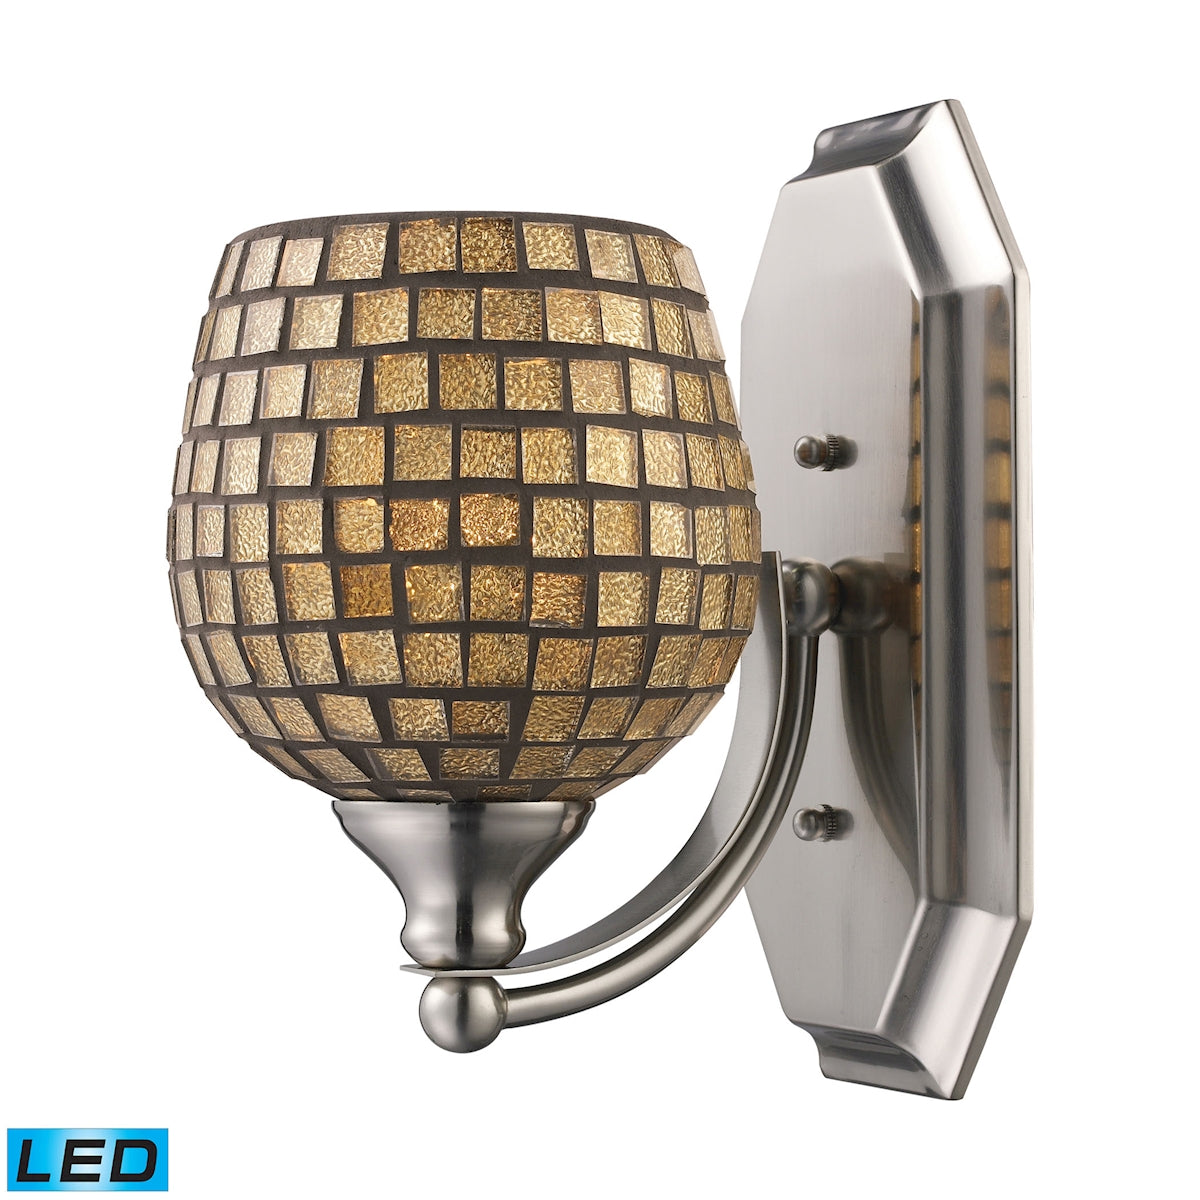 ELK Lighting 570-1C-GLD-LED Mix and Match Vanity 1-Light Wall Lamp in Chrome with Gold Leaf Glass - Includes LED Bulb